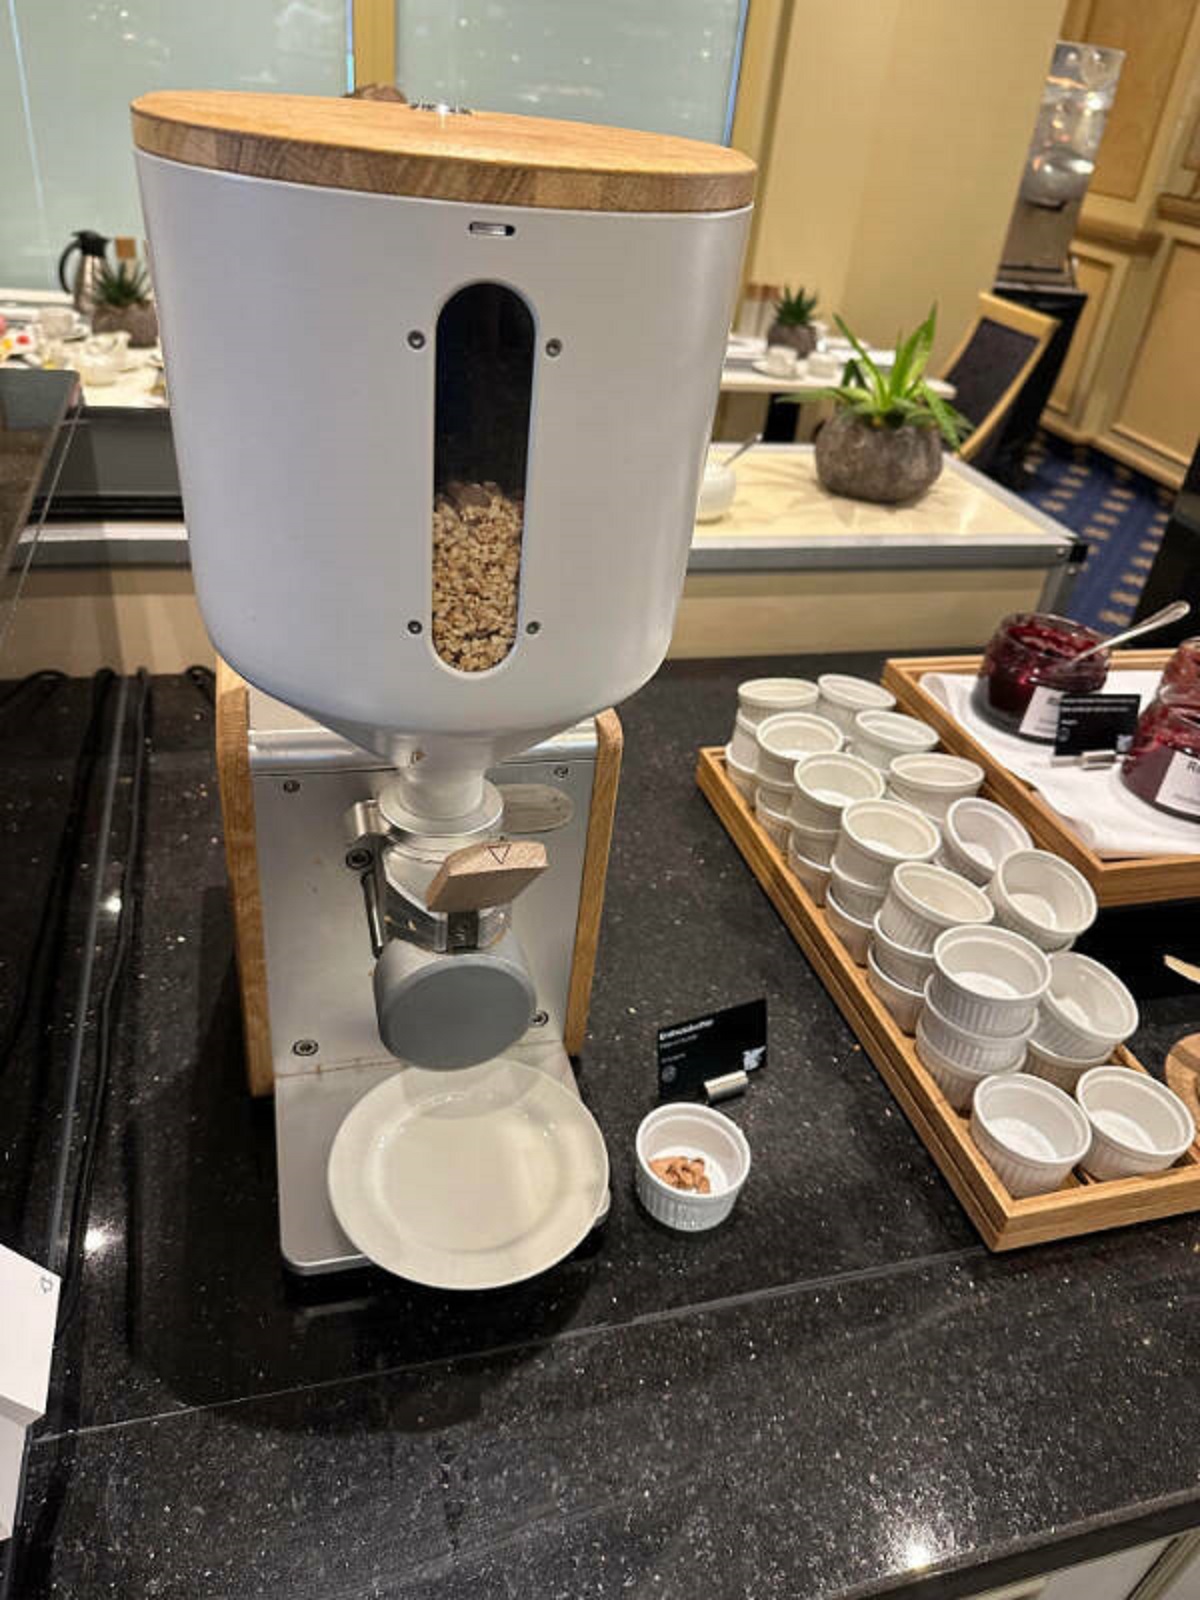 “This instant peanut butter machine at a breakfast buffet”